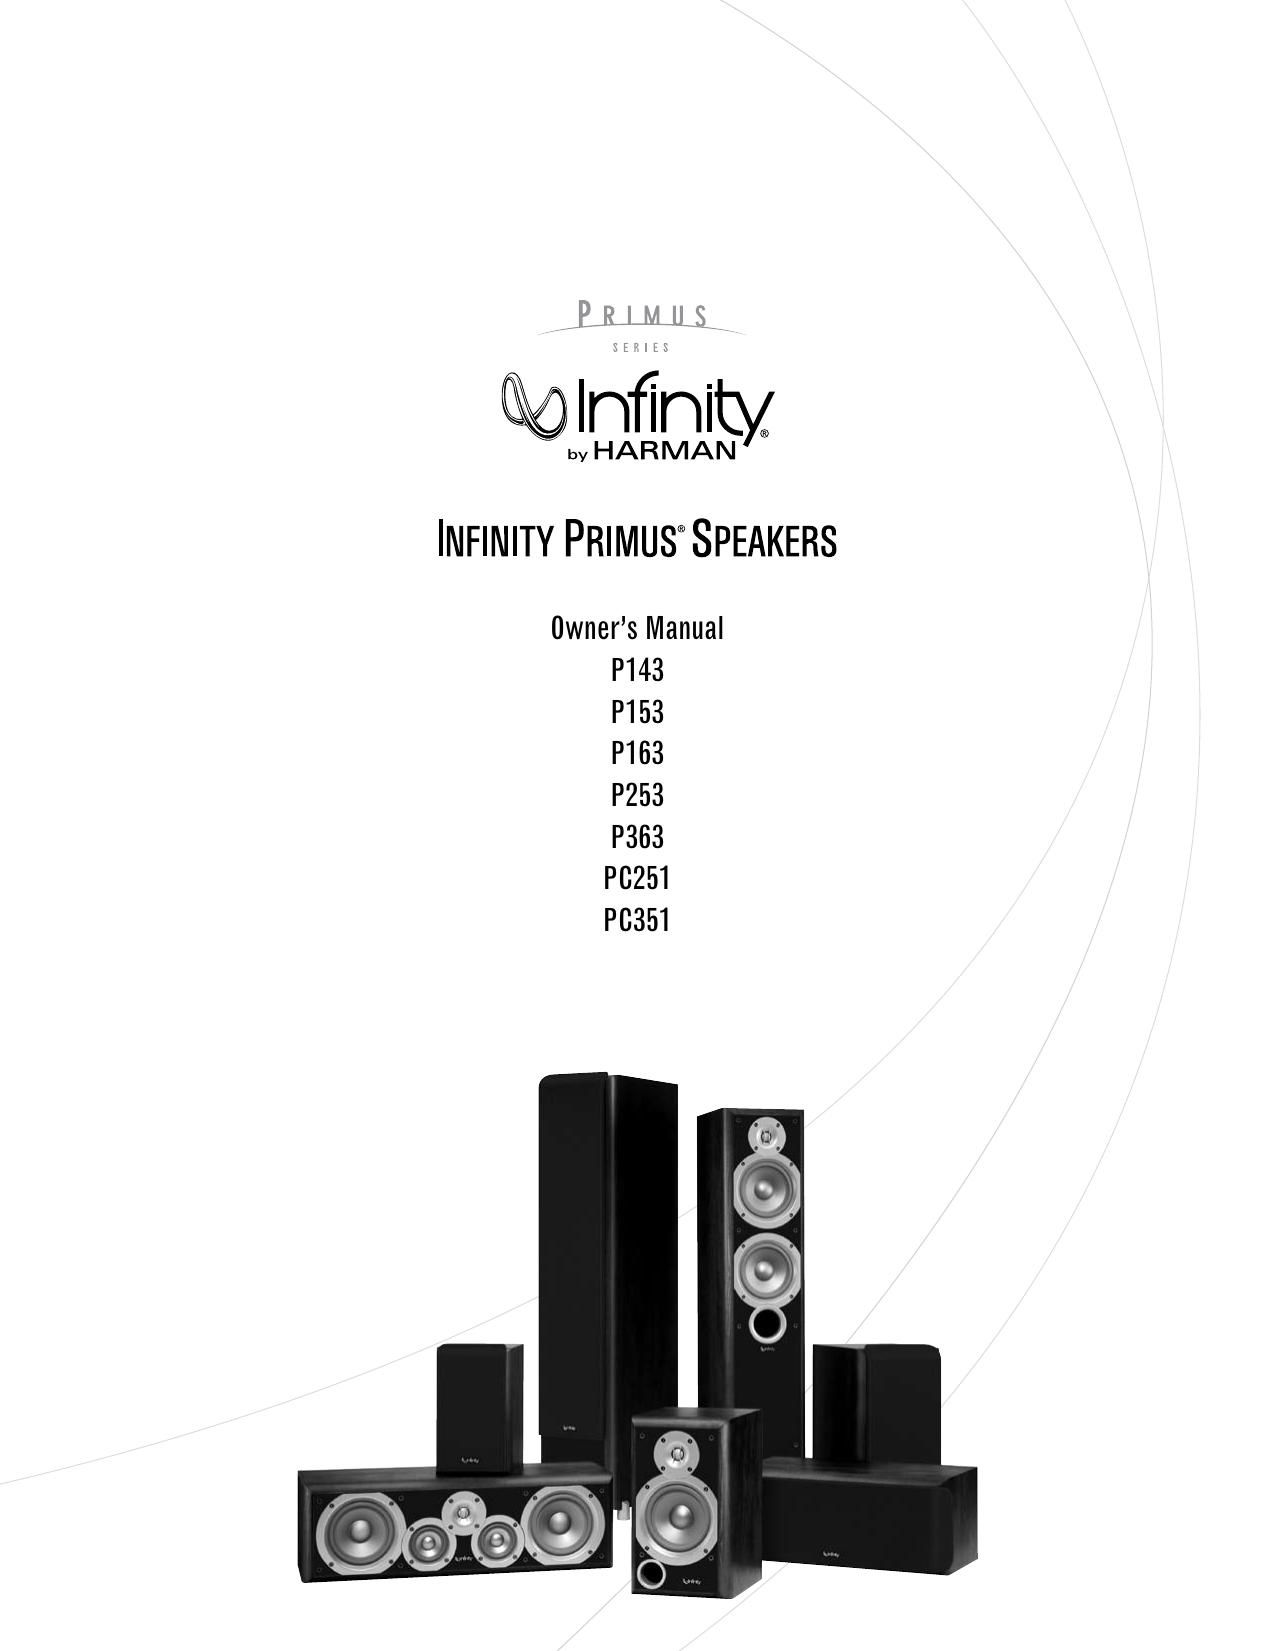 Infinity Primus P 153 Owners Manual